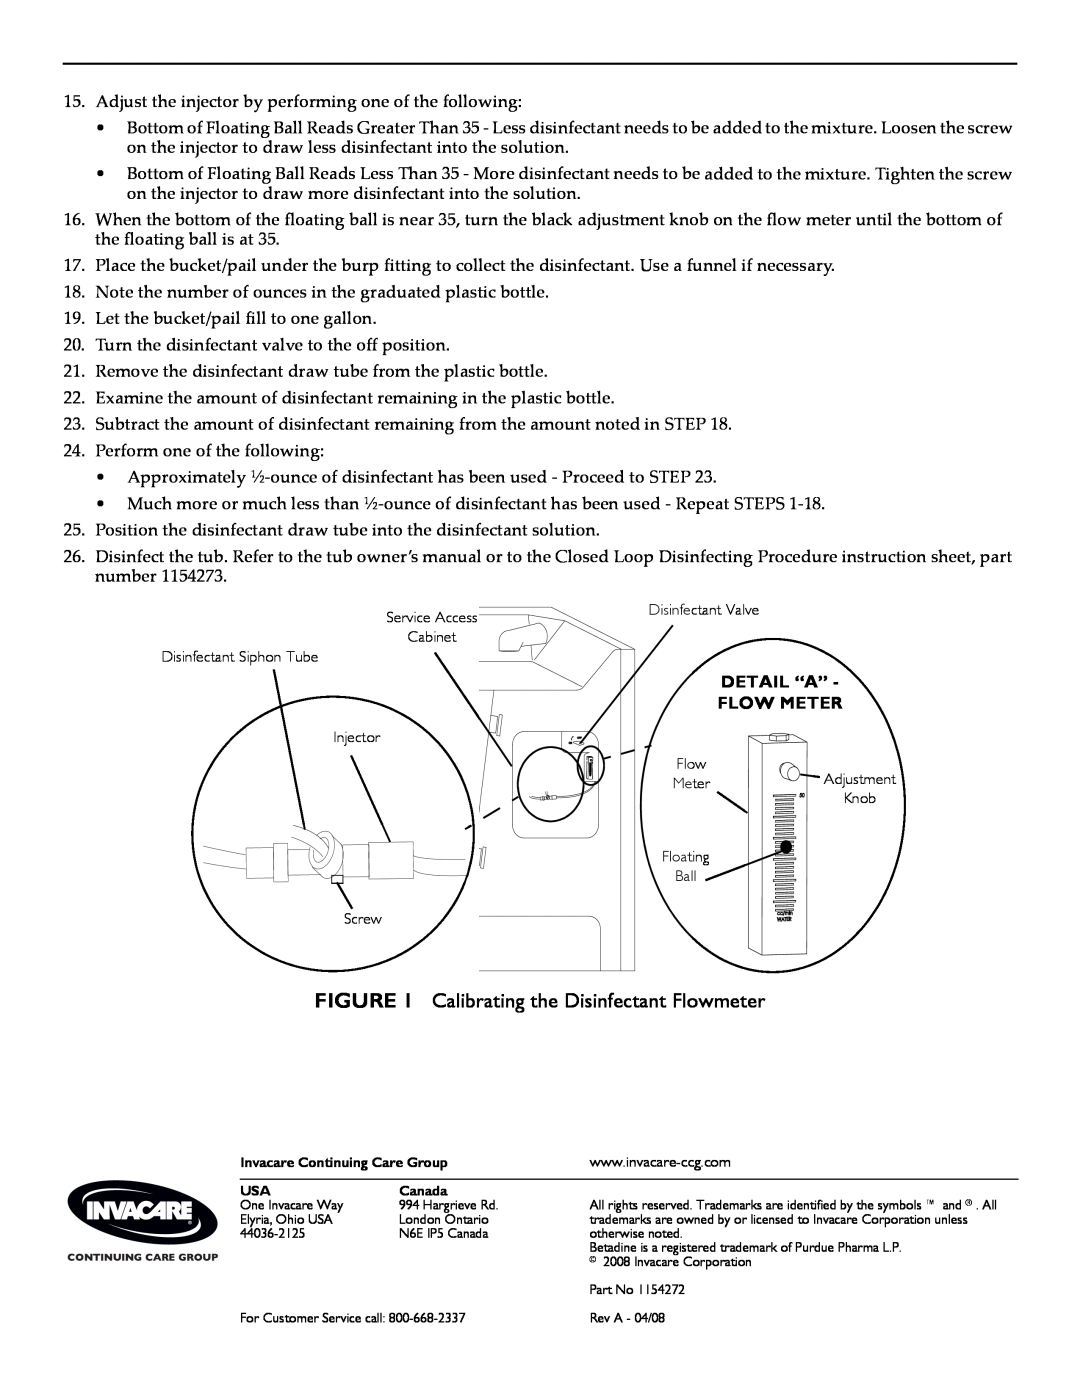 Invacare 1154272 owner manual Calibrating the Disinfectant Flowmeter, Detail “A” Flow Meter 